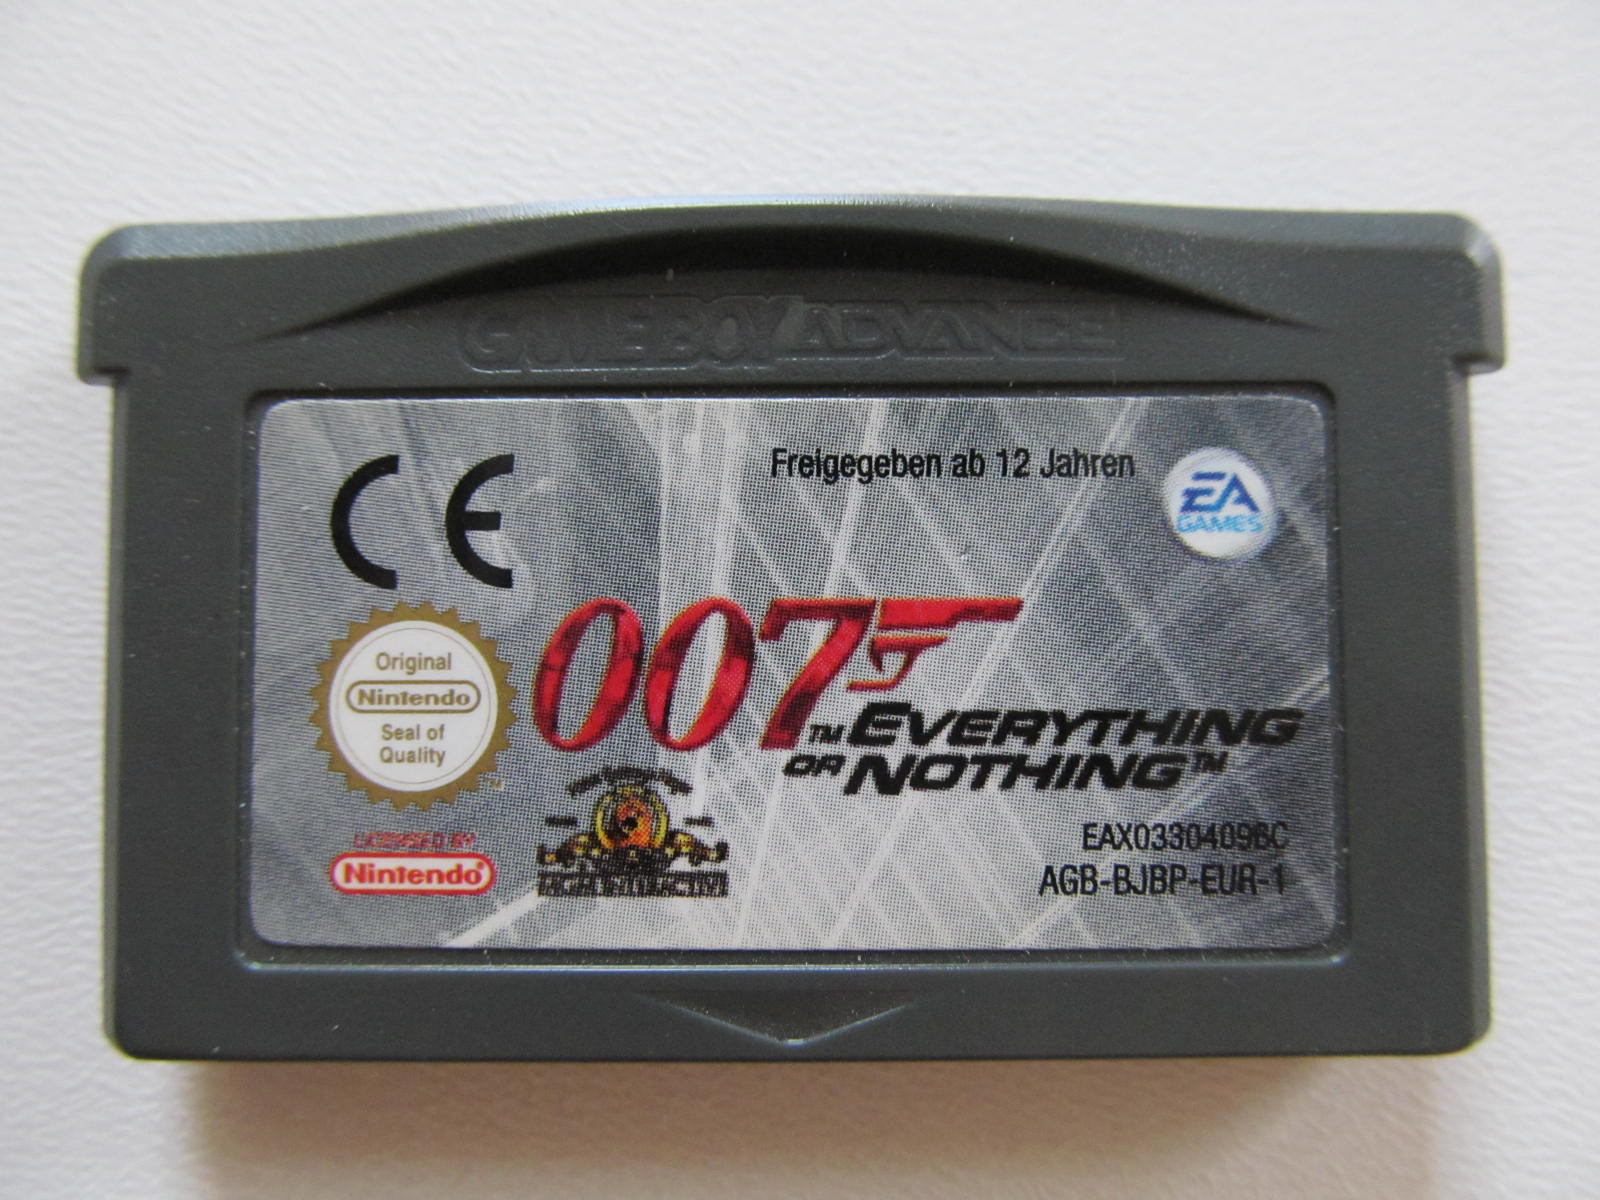 007 - Everything or Nothing